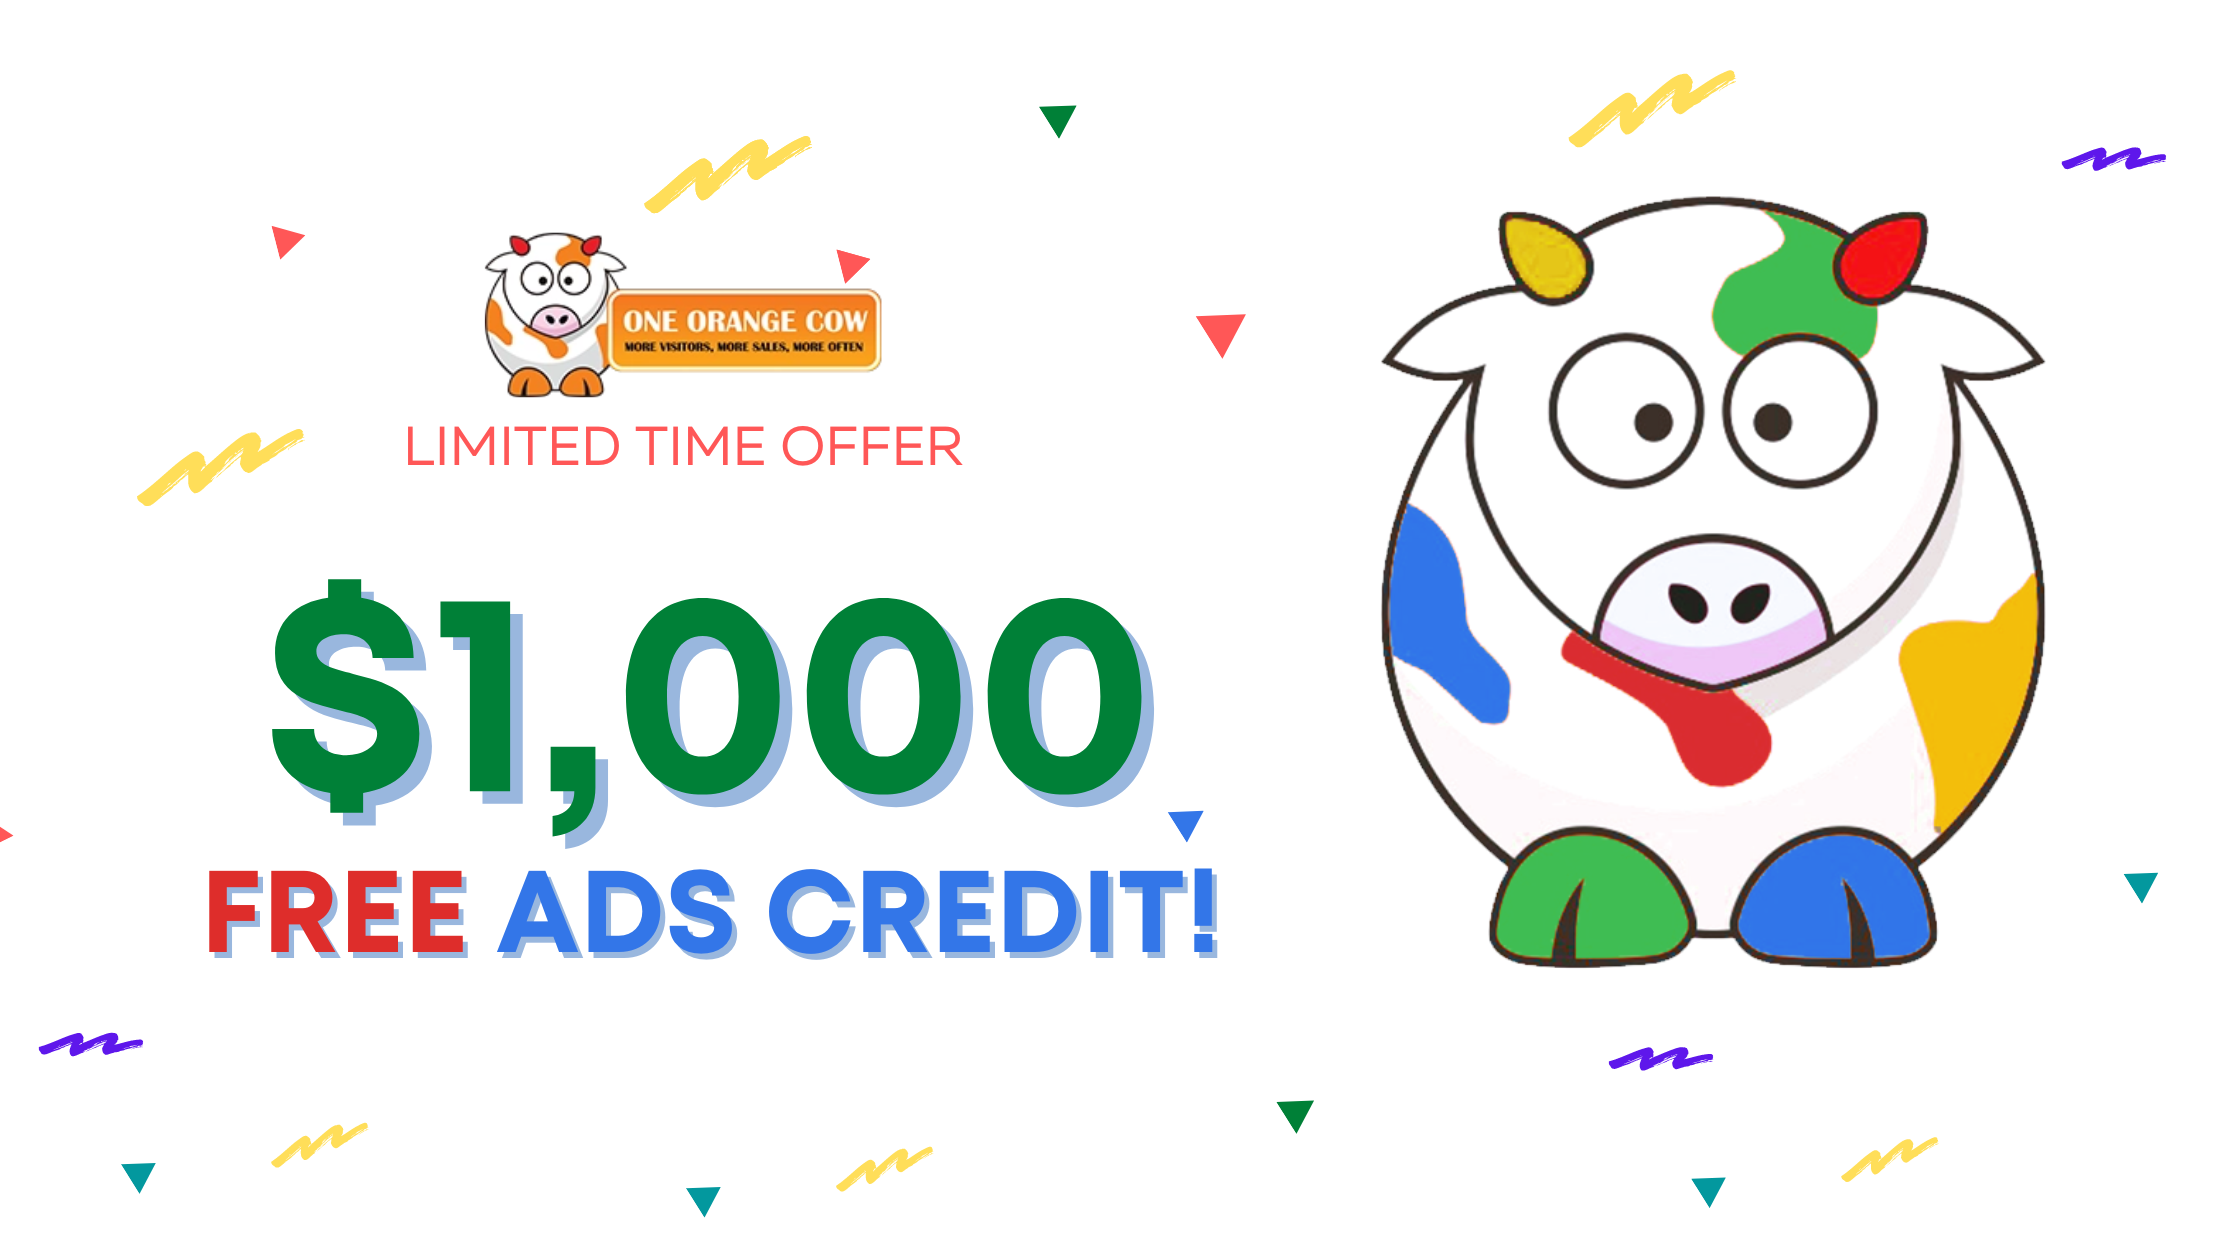 Get $1000 Free Google Ads Credit with One Orange Cow